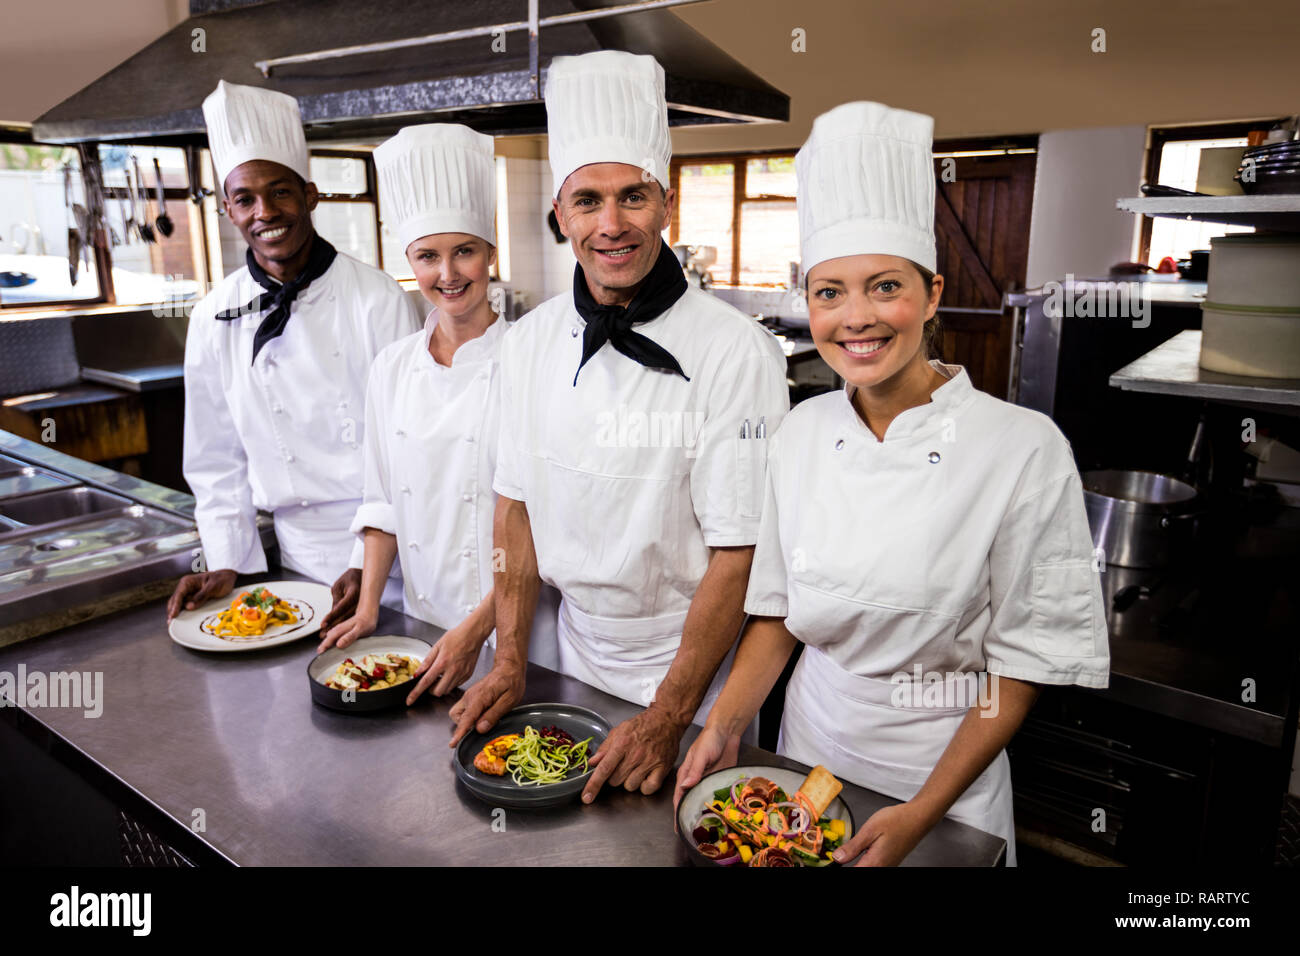 Group of chefs holding plate of prepared food in kitchen Stock Photo